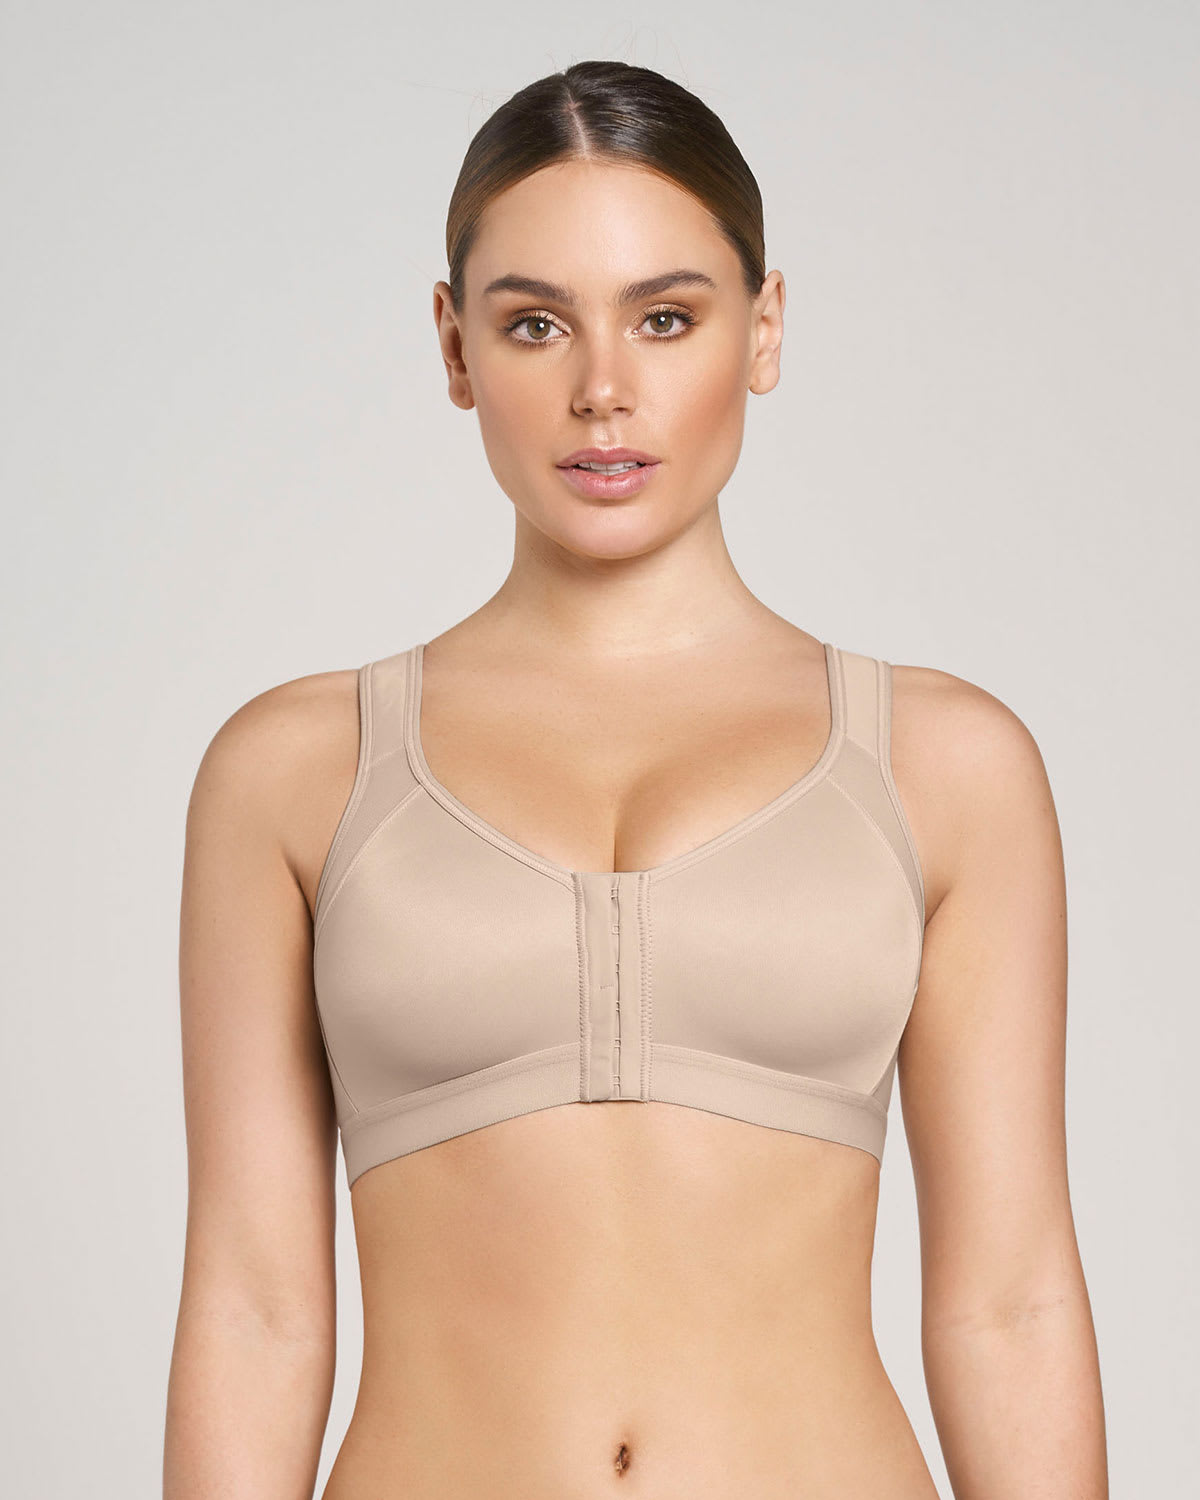 Surg-Ease Bra with Hook & Eye Front Closure- Post Mastectomy Recovery Bra,  Made in USA